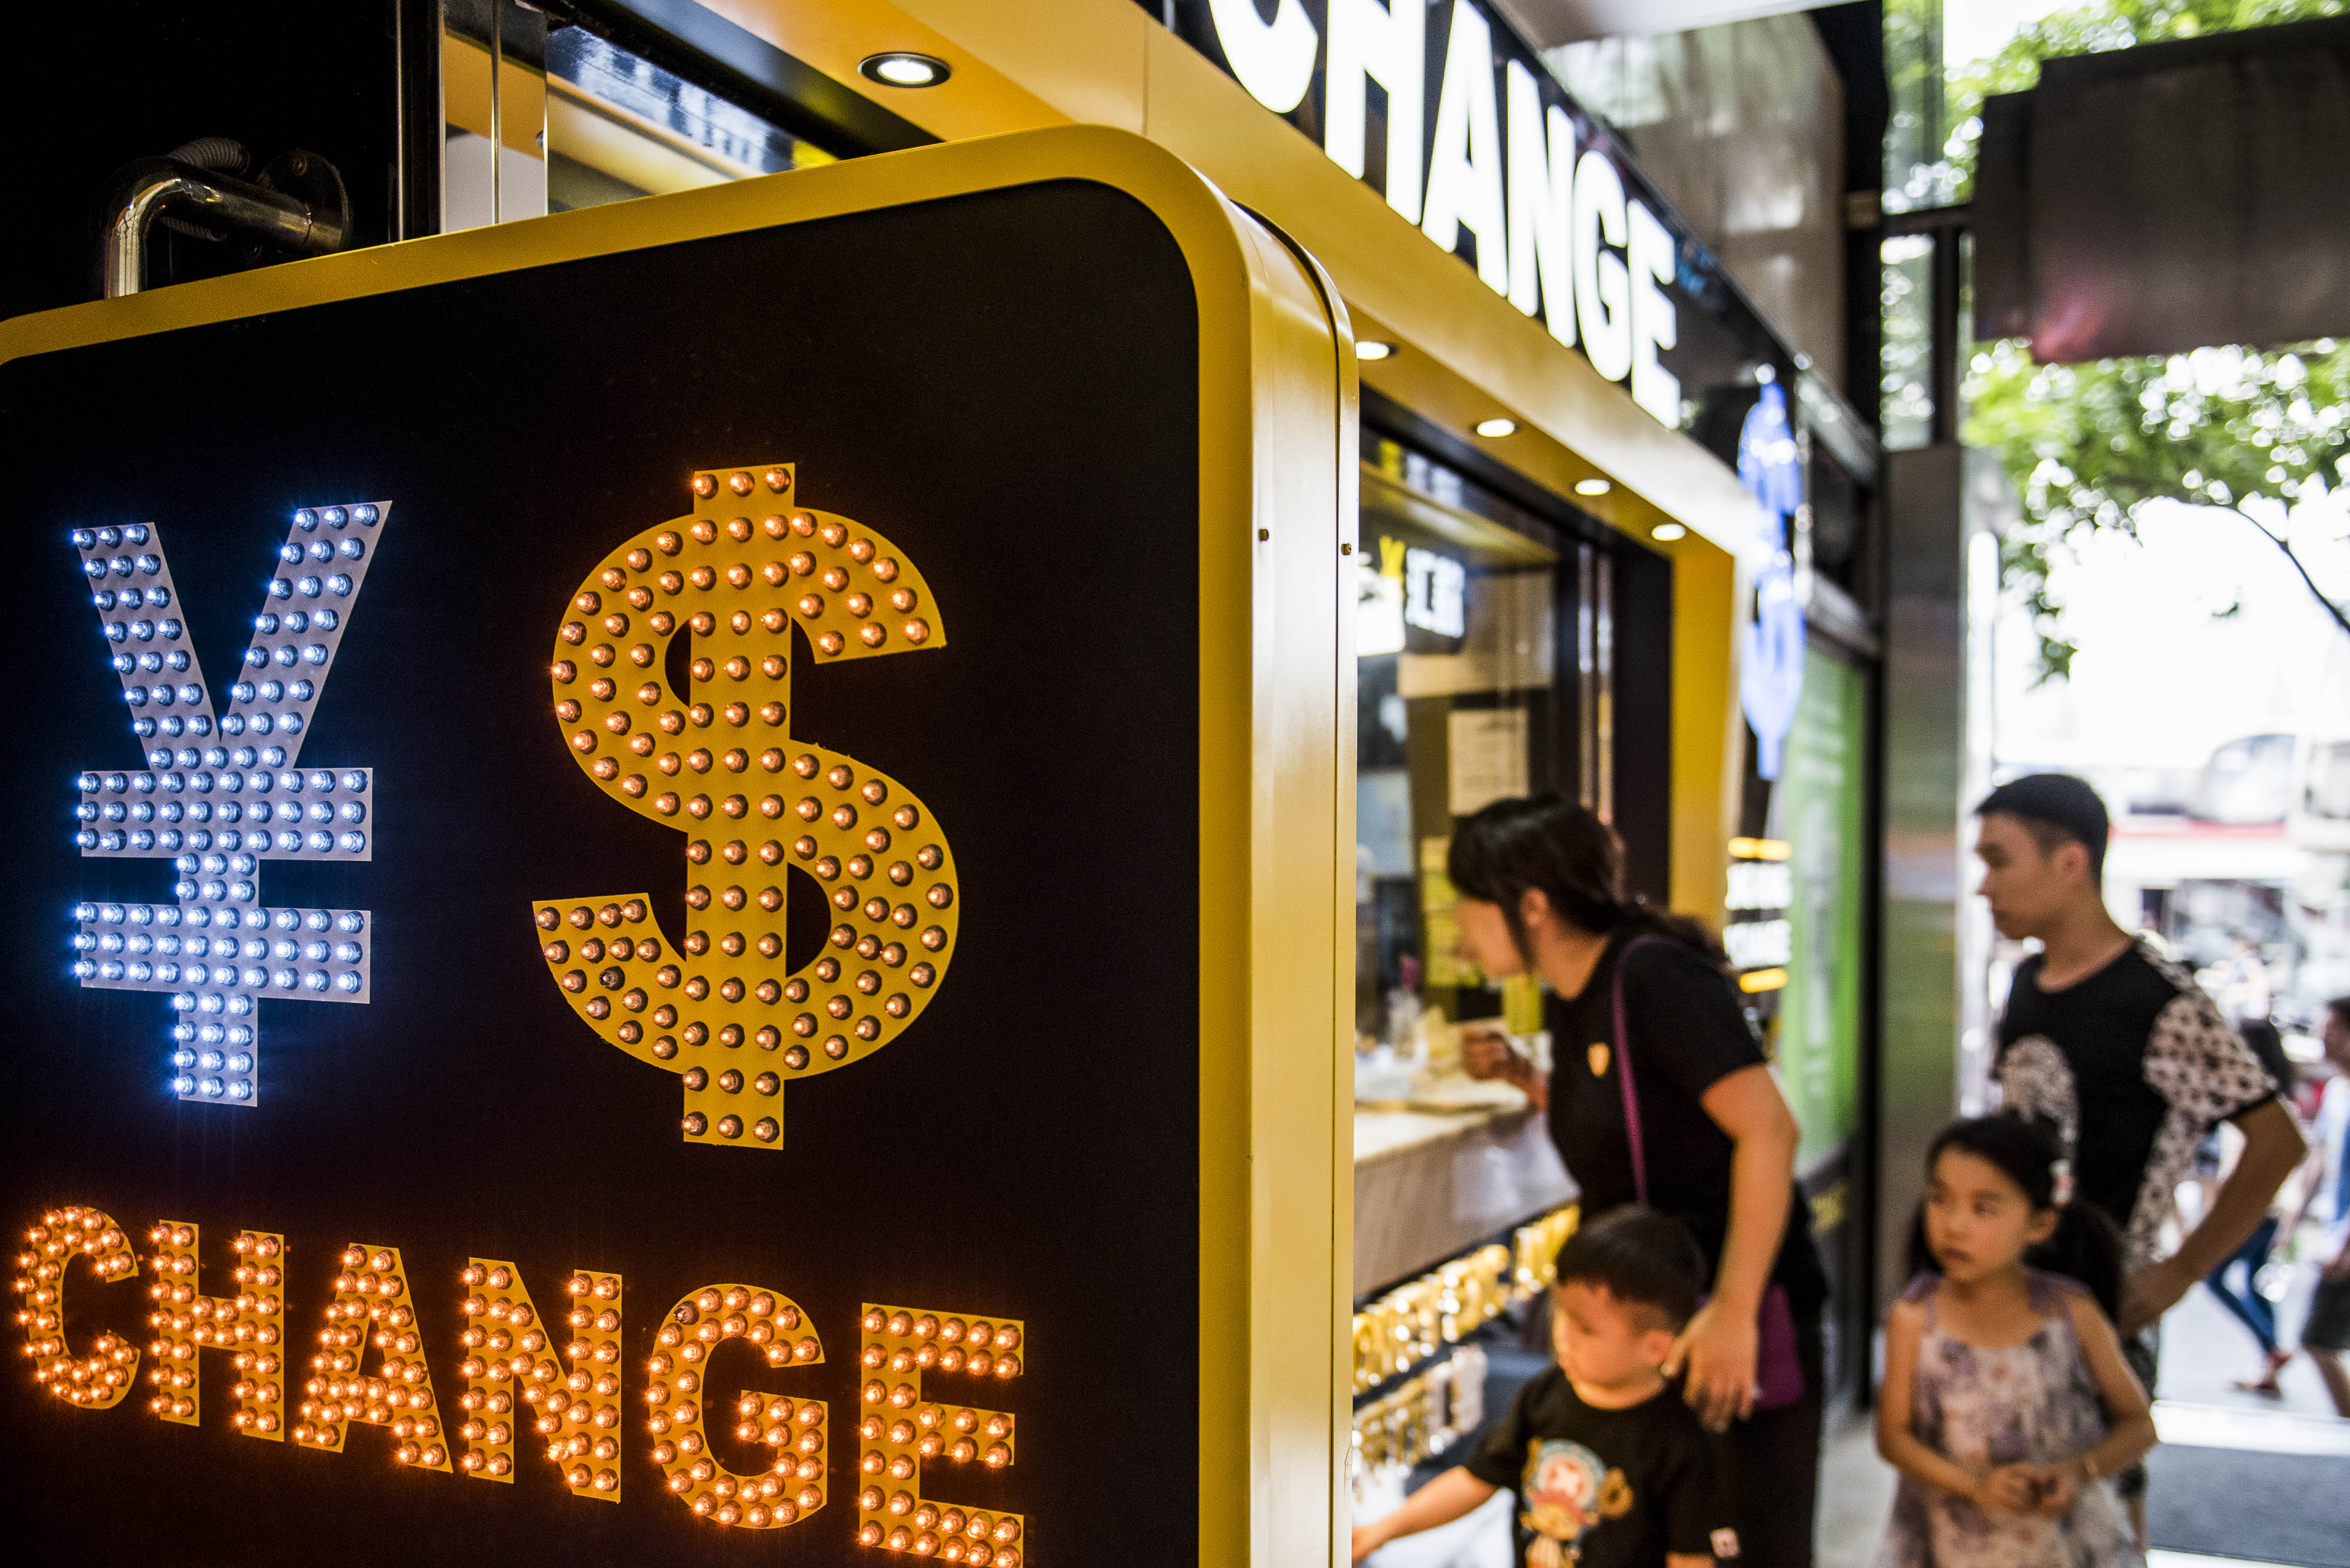 The currency symbol for the Chinese yuan and the dollar is displayed at a currency exchange store in Hong Kong, China, on Wednesday, Aug. 12, 2015. The yuan sank for a second day, spurring China's central bank to intervene as the biggest rout since 1994 tested the government's resolve to give market forces more sway in determining the exchange rate. Photographer: Xaume Olleros/Bloomberg